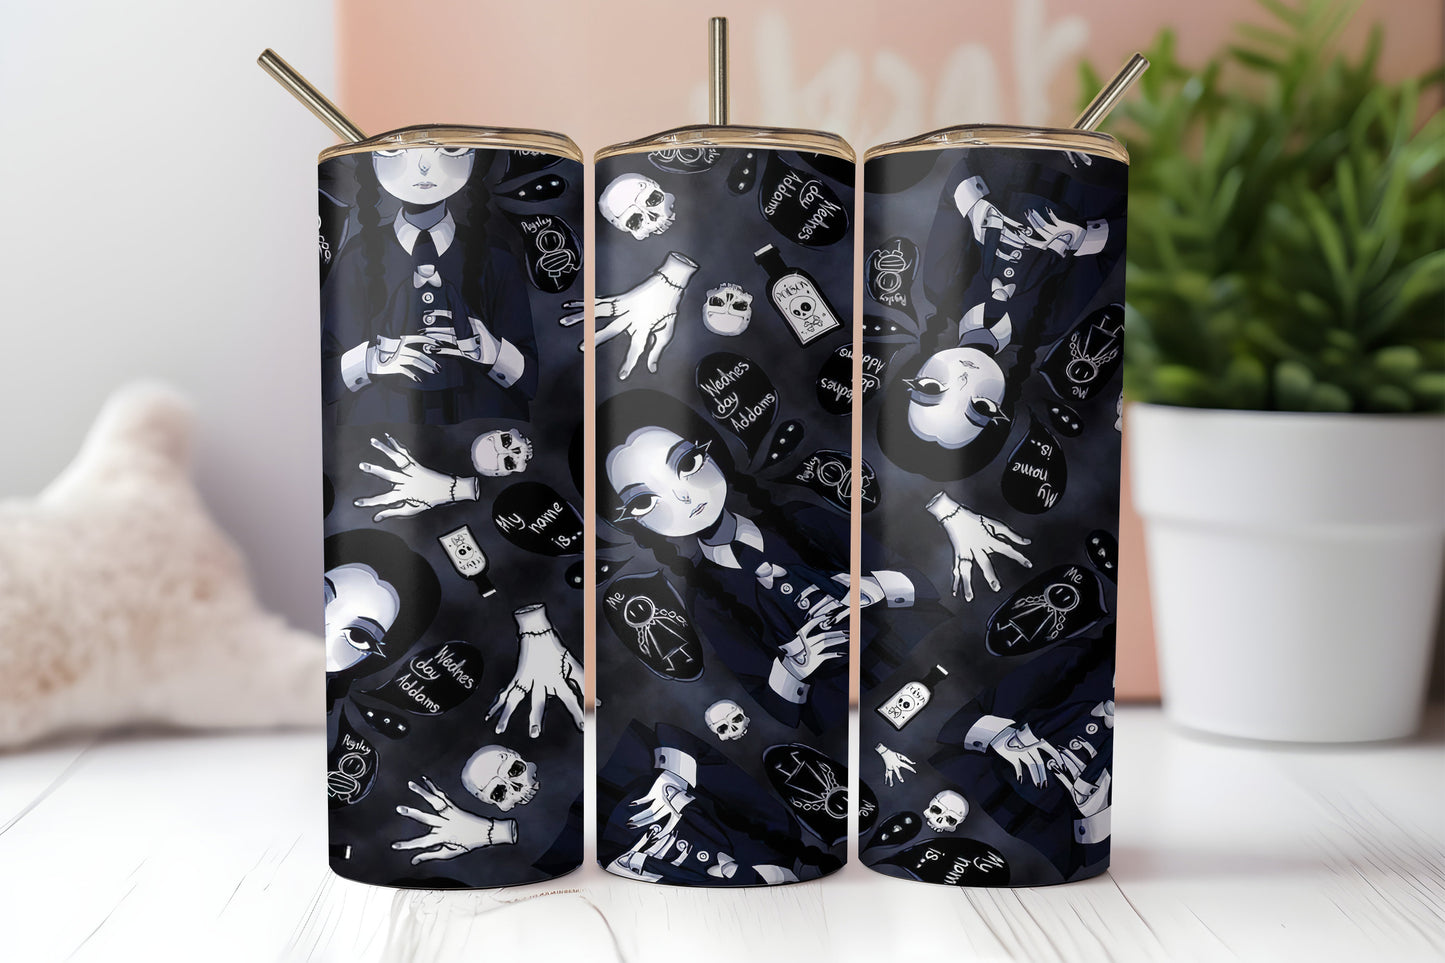 Apathetic Goth 20oz Tumbler - Customizable Mysterious Character-Themed Travel Cup - Ideal for Fans of Whimsical Gothic Design